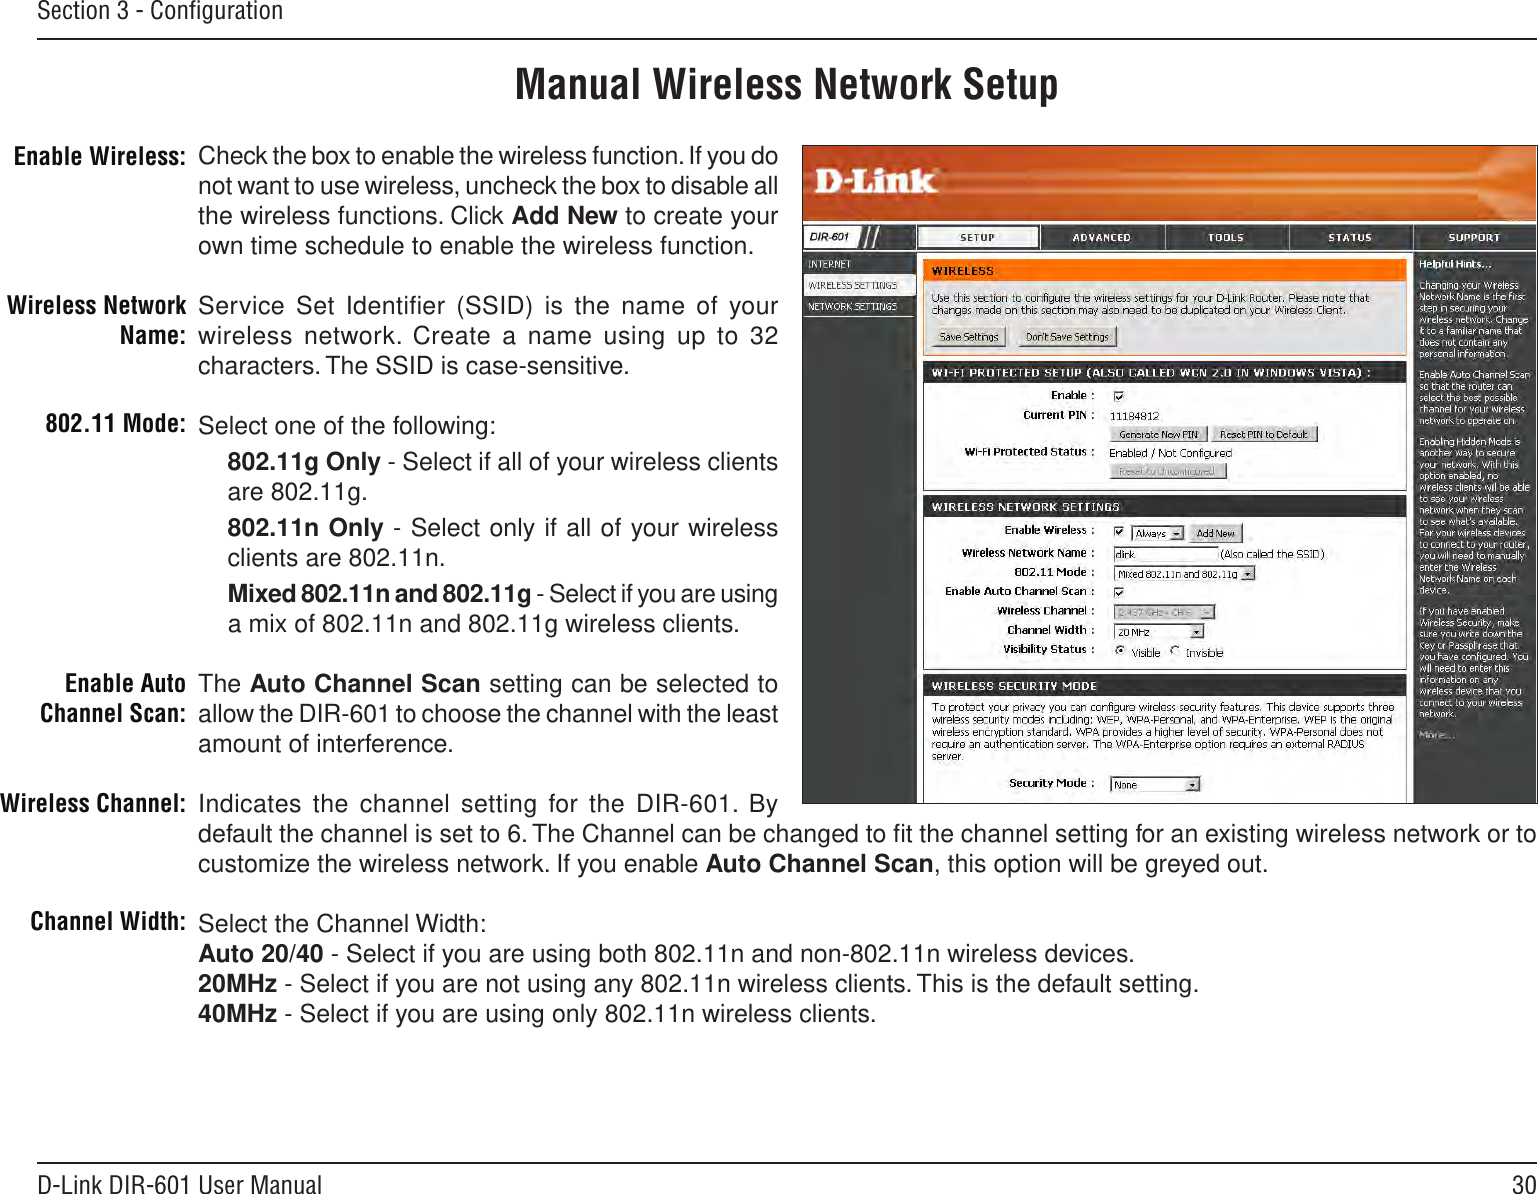 30D-Link DIR-601 User ManualSection 3 - ConﬁgurationManual Wireless Network SetupCheck the box to enable the wireless function. If you do not want to use wireless, uncheck the box to disable all the wireless functions. Click Add New to create your own time schedule to enable the wireless function. Service Set Identiﬁer (SSID) is the  name of your wireless network. Create a name  using up to 32 characters. The SSID is case-sensitive.Select one of the following:802.11g Only - Select if all of your wireless clients are 802.11g.802.11n Only - Select only if all of your wireless clients are 802.11n.Mixed 802.11n and 802.11g - Select if you are using a mix of 802.11n and 802.11g wireless clients.The Auto Channel Scan setting can be selected to allow the DIR-601 to choose the channel with the least amount of interference.Indicates the channel setting for the DIR-601. By default the channel is set to 6. The Channel can be changed to ﬁt the channel setting for an existing wireless network or to customize the wireless network. If you enable Auto Channel Scan, this option will be greyed out.Select the Channel Width:Auto 20/40 - Select if you are using both 802.11n and non-802.11n wireless devices.20MHz - Select if you are not using any 802.11n wireless clients. This is the default setting. 40MHz - Select if you are using only 802.11n wireless clients.  Enable Wireless:Wireless Network Name:802.11 Mode:Enable Auto Channel Scan:Wireless Channel:Channel Width: